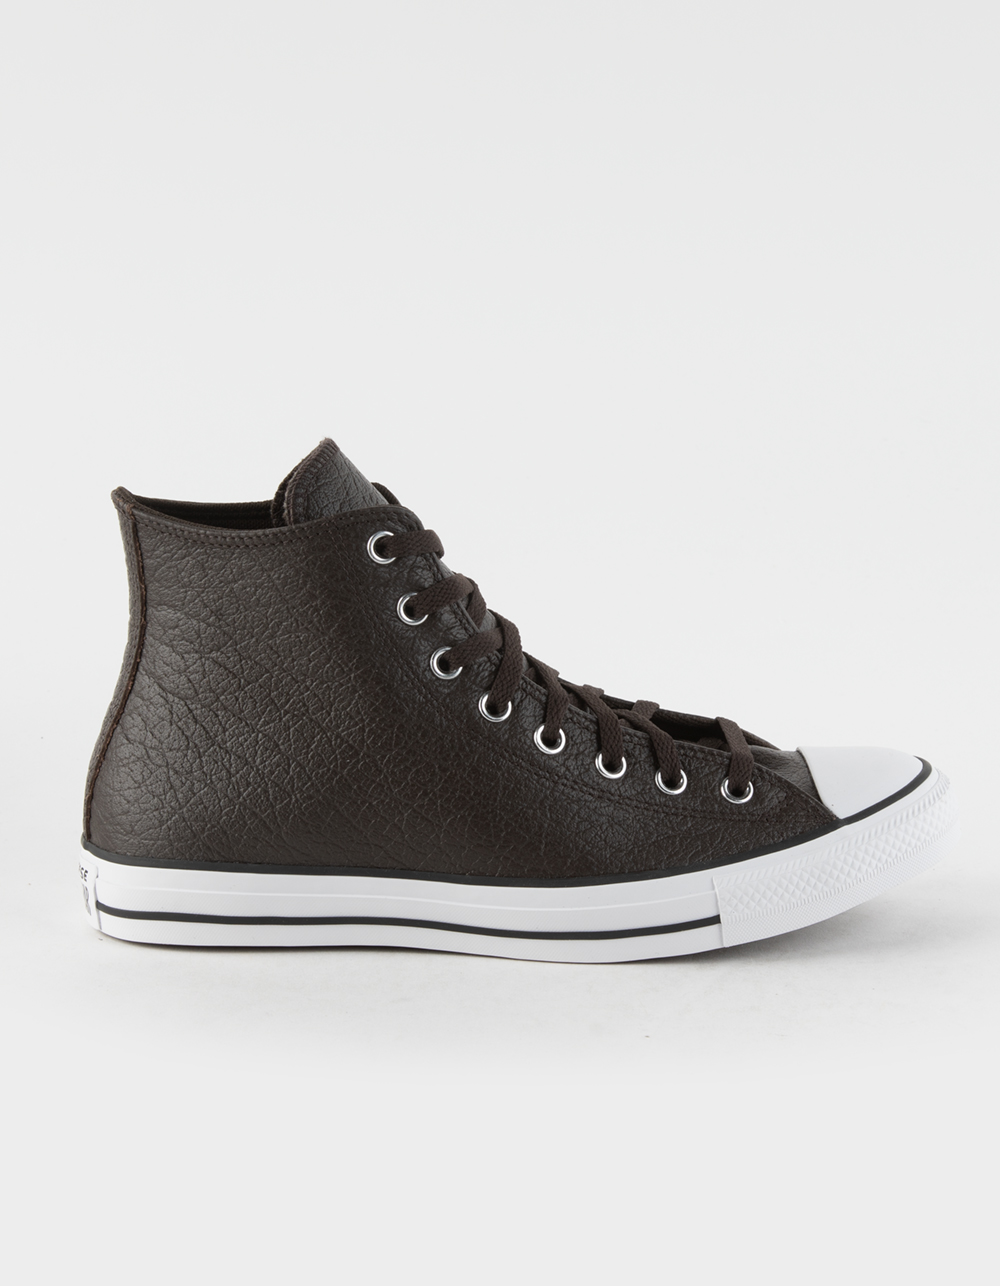 Converse Chuck Taylor All Star High Brown Leather Sneakers A01461C 